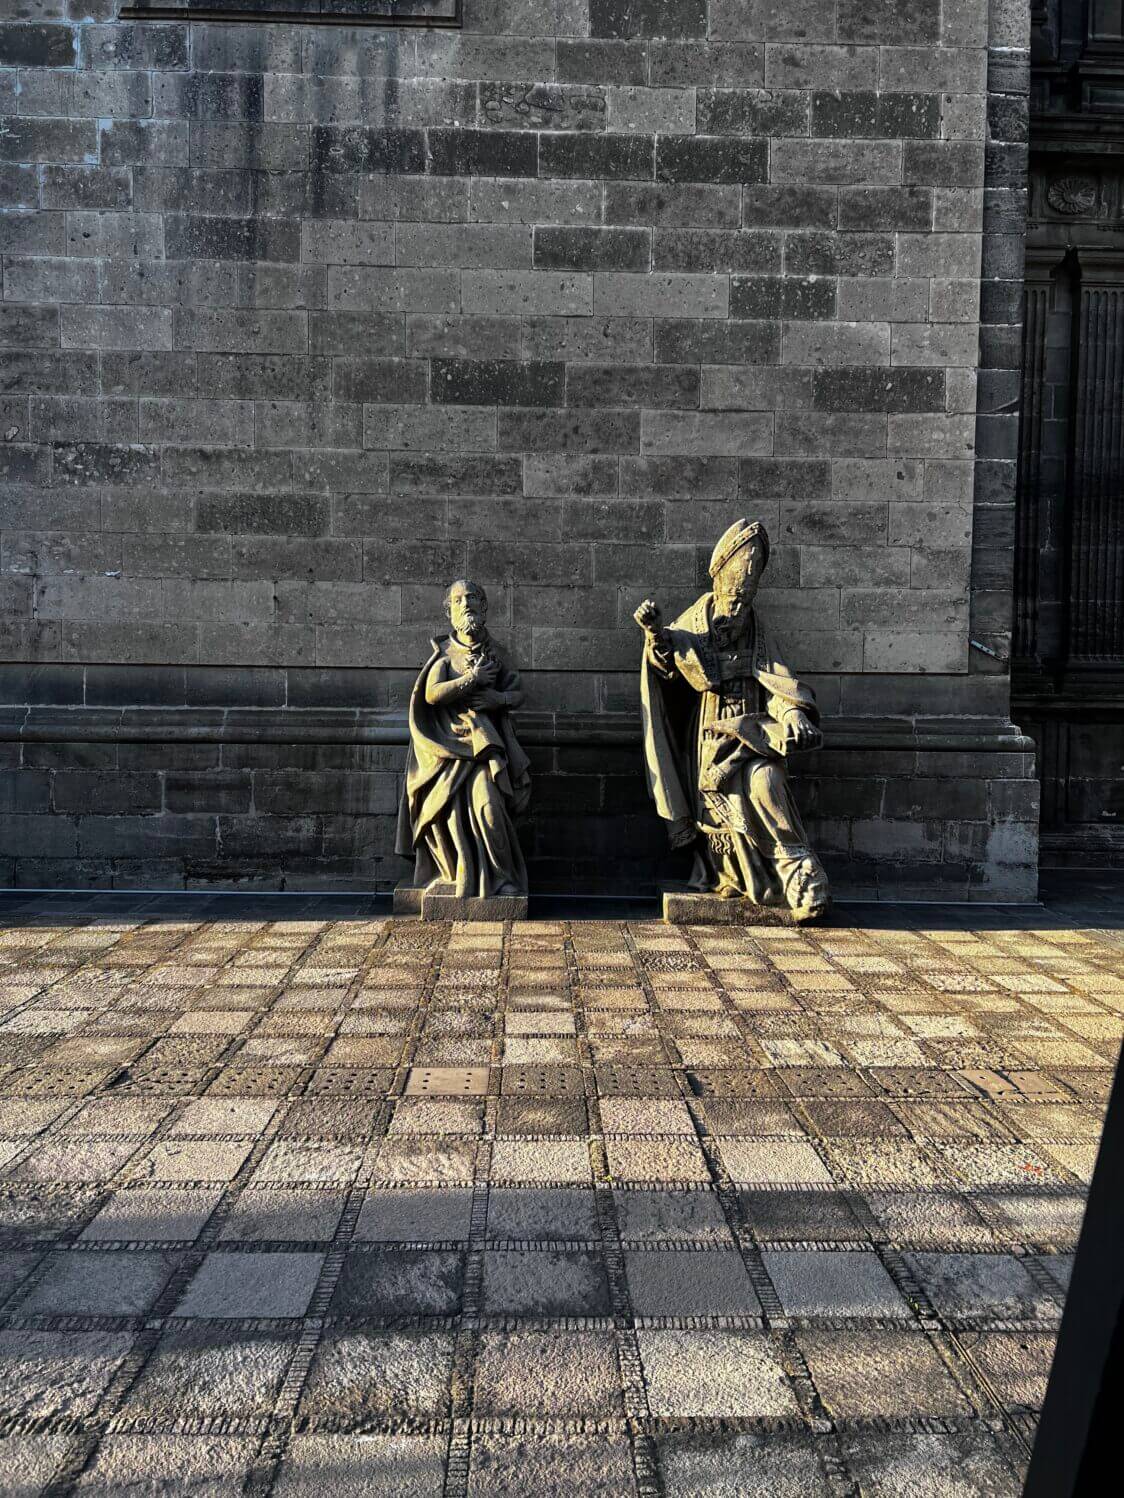 two statues outside a church that appear to be
dancing